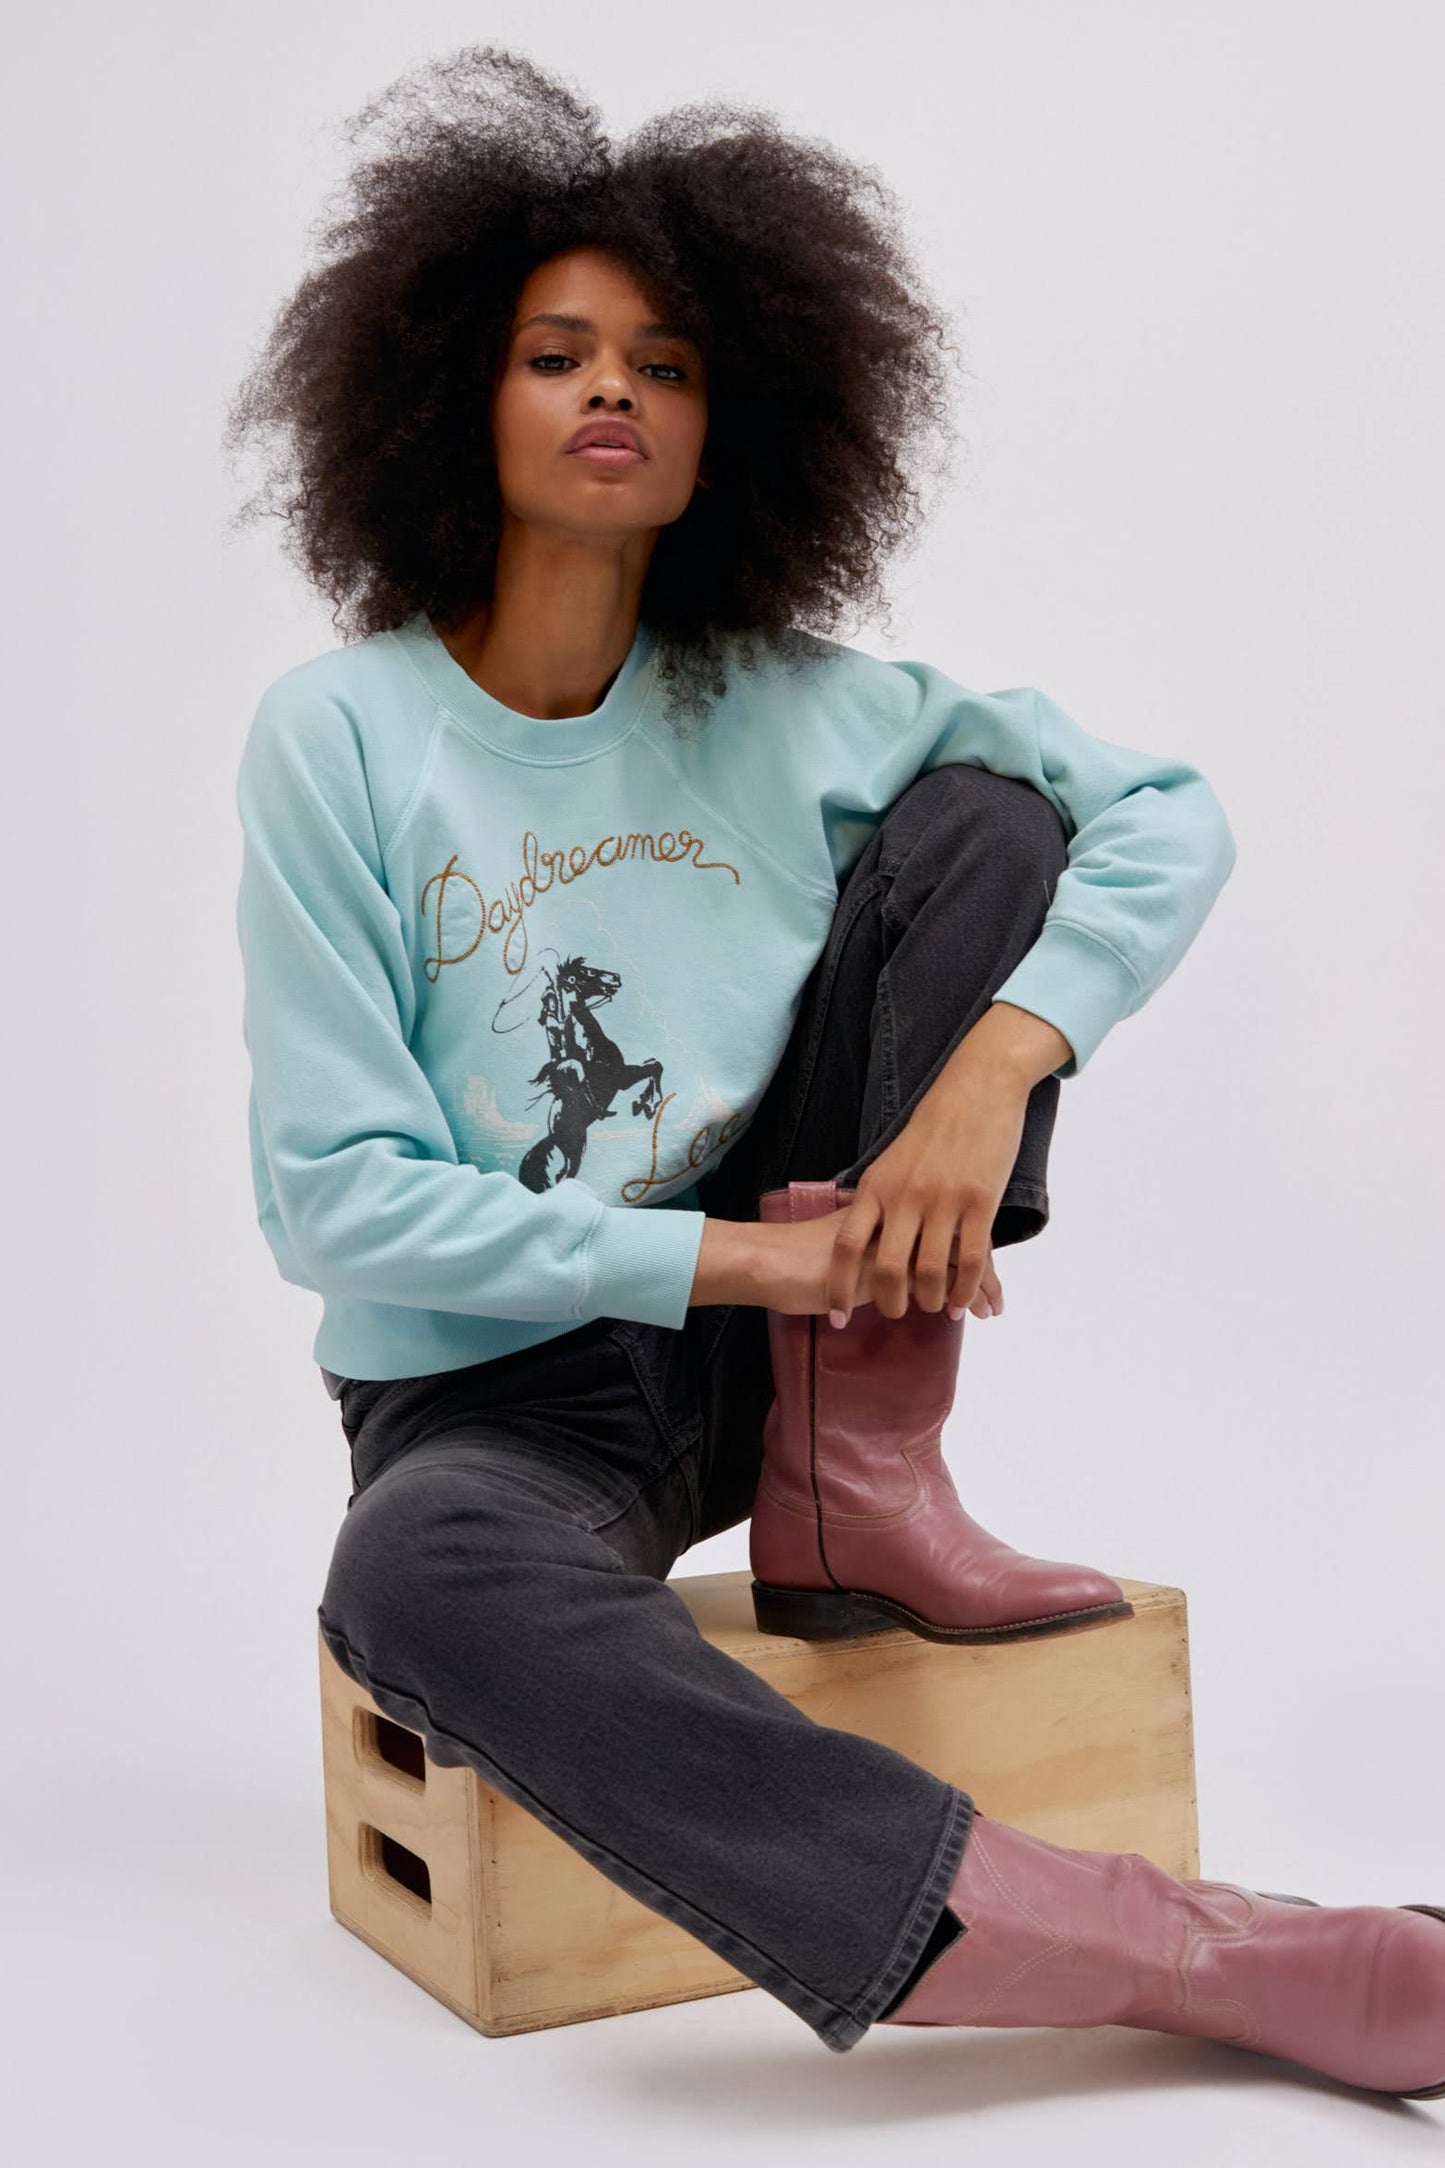 A curly-haired model featuring a raglan crew in icy moon with a bucking cowgirl graphic inspired by the spirit of the West lands on a lightweight, french terry raglan crew embroidered with lasso lettering.